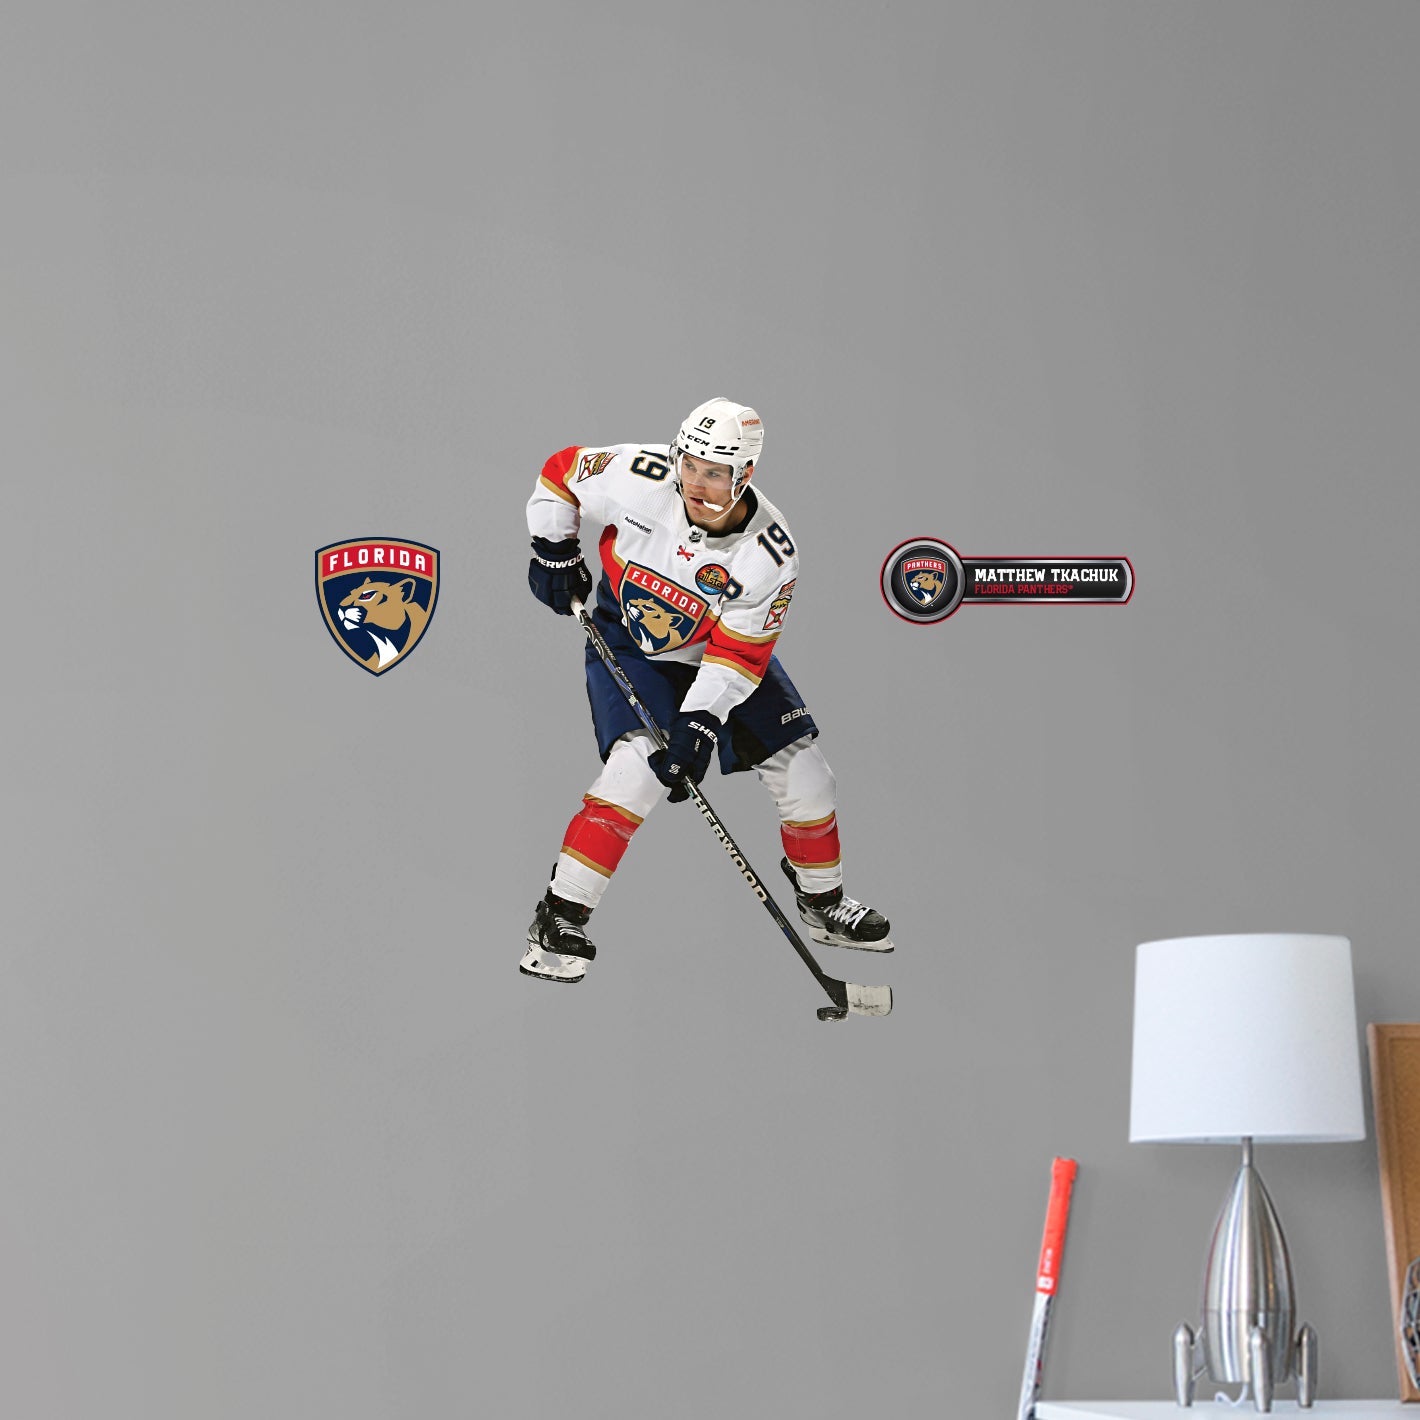 Florida Panthers: Matthew Tkachuk - Officially Licensed NHL Removable Adhesive Decal